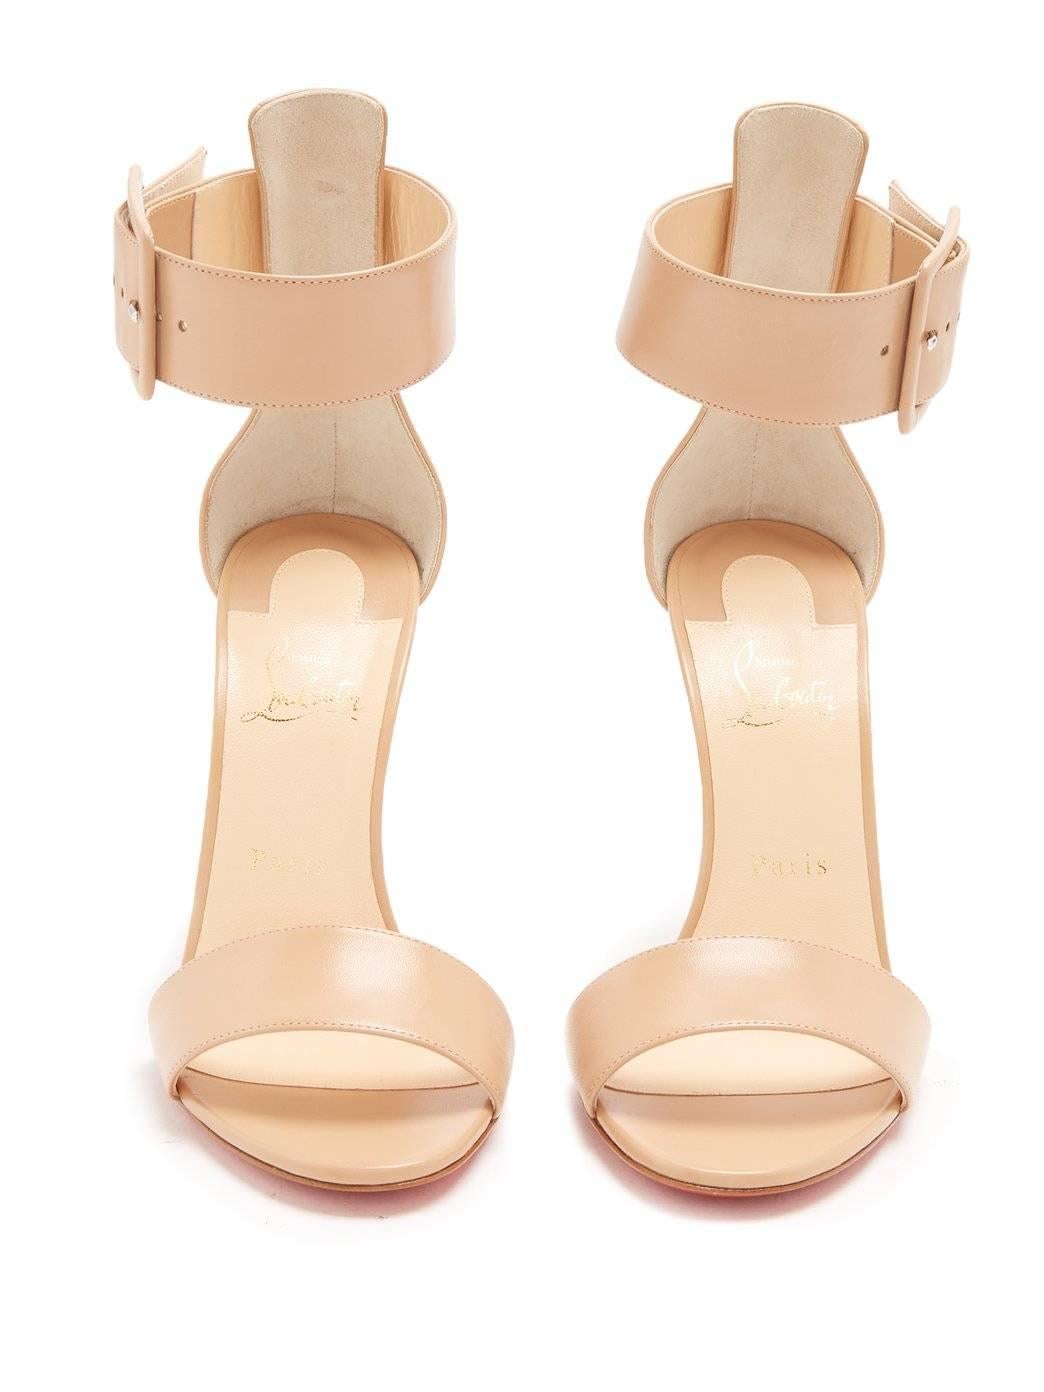 Women's Christian Louboutin New Nude Leather Buckle Evening Sandals Heels 